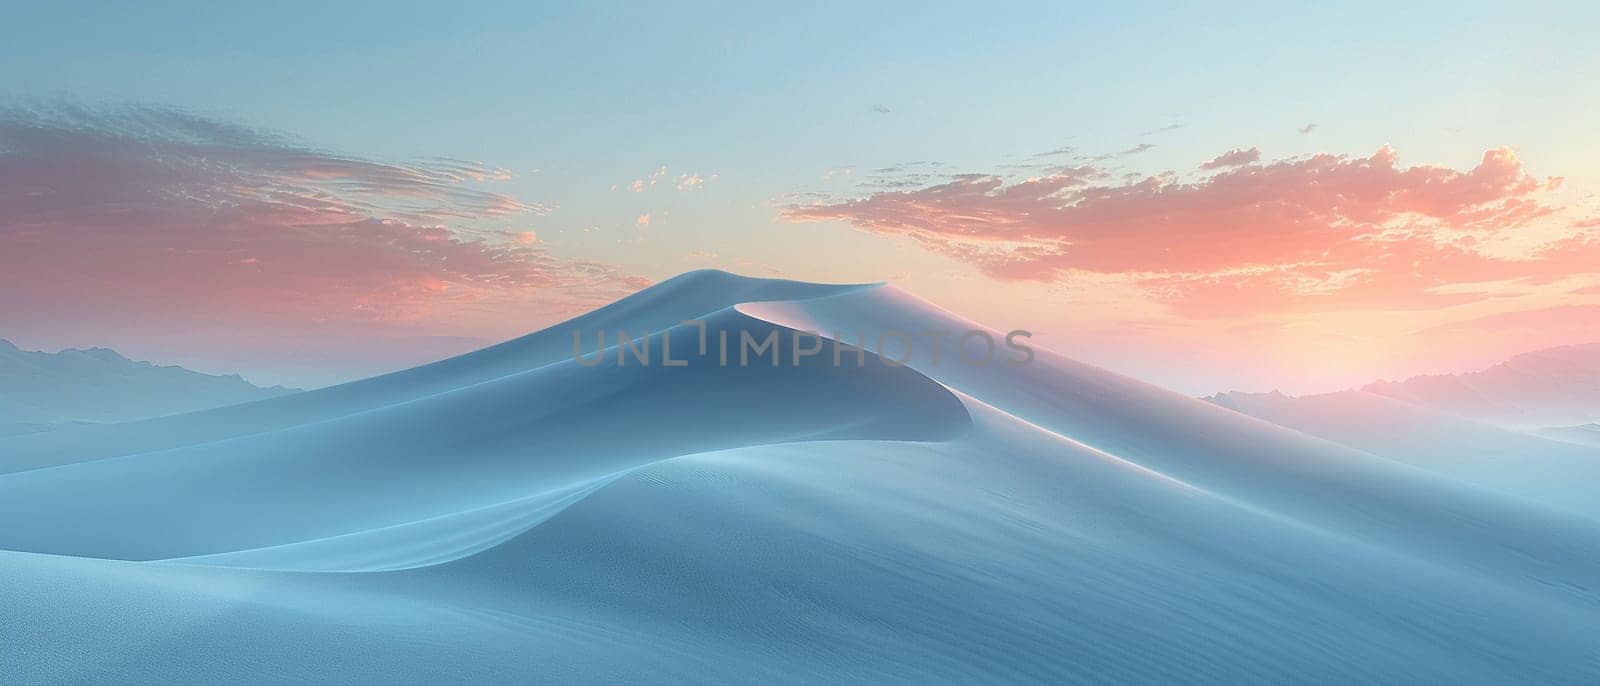 Soft sand dunes at sunrise by Benzoix